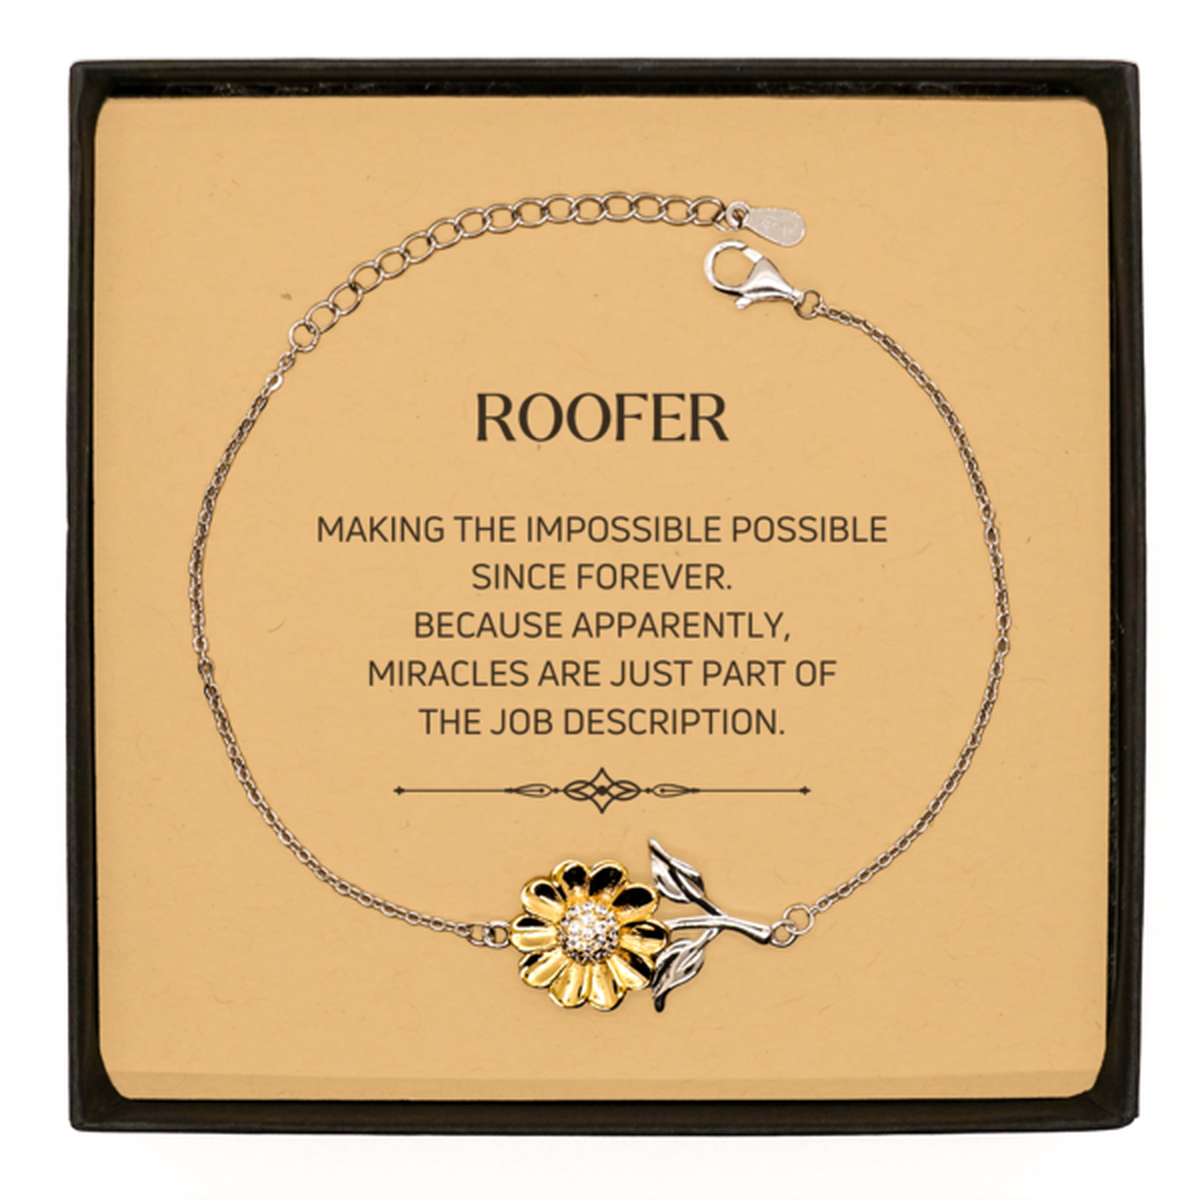 Funny Roofer Gifts, Miracles are just part of the job description, Inspirational Birthday Sunflower Bracelet For Roofer, Men, Women, Coworkers, Friends, Boss